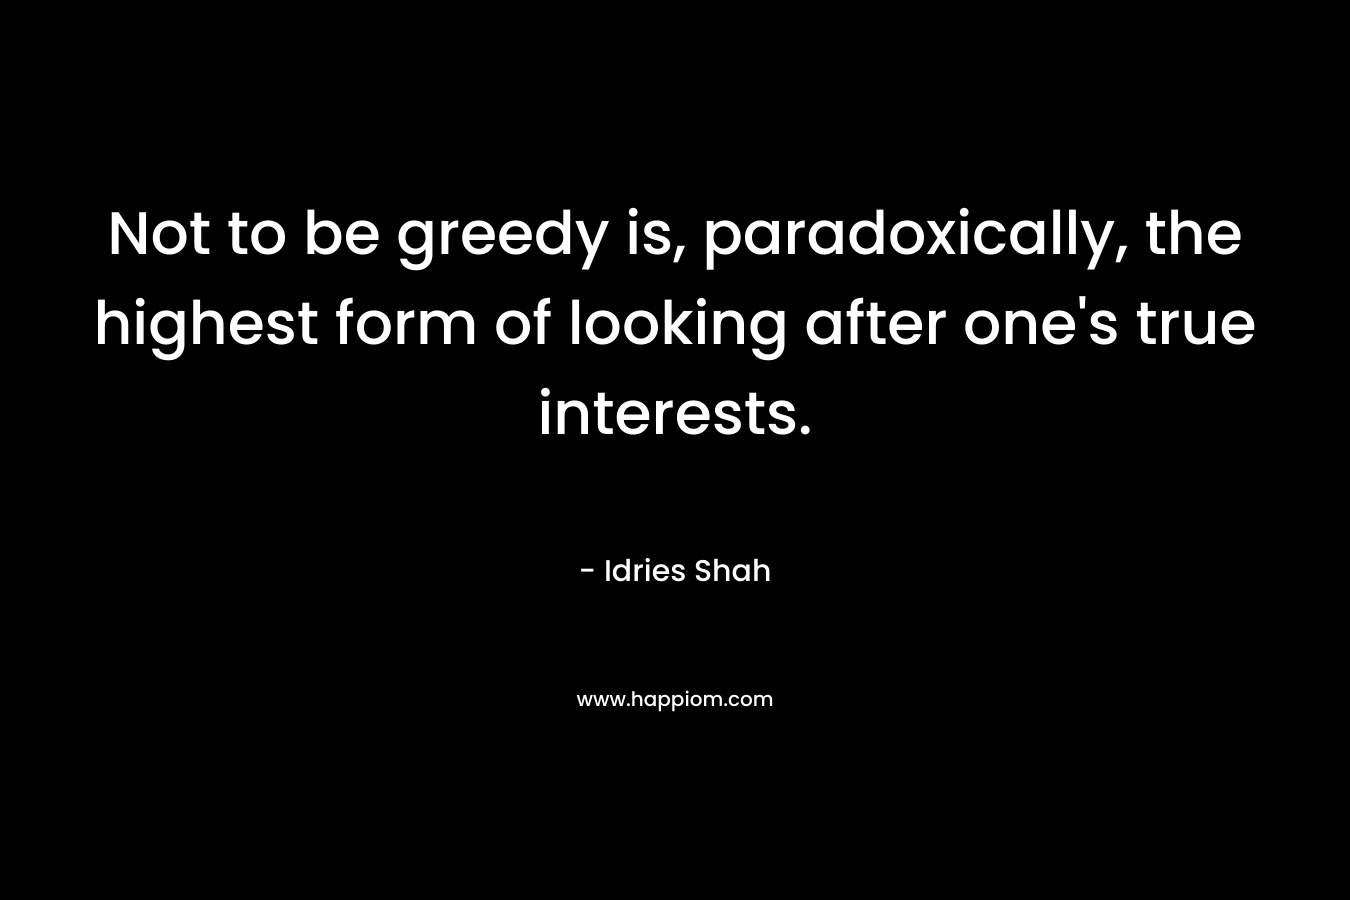 Not to be greedy is, paradoxically, the highest form of looking after one's true interests.